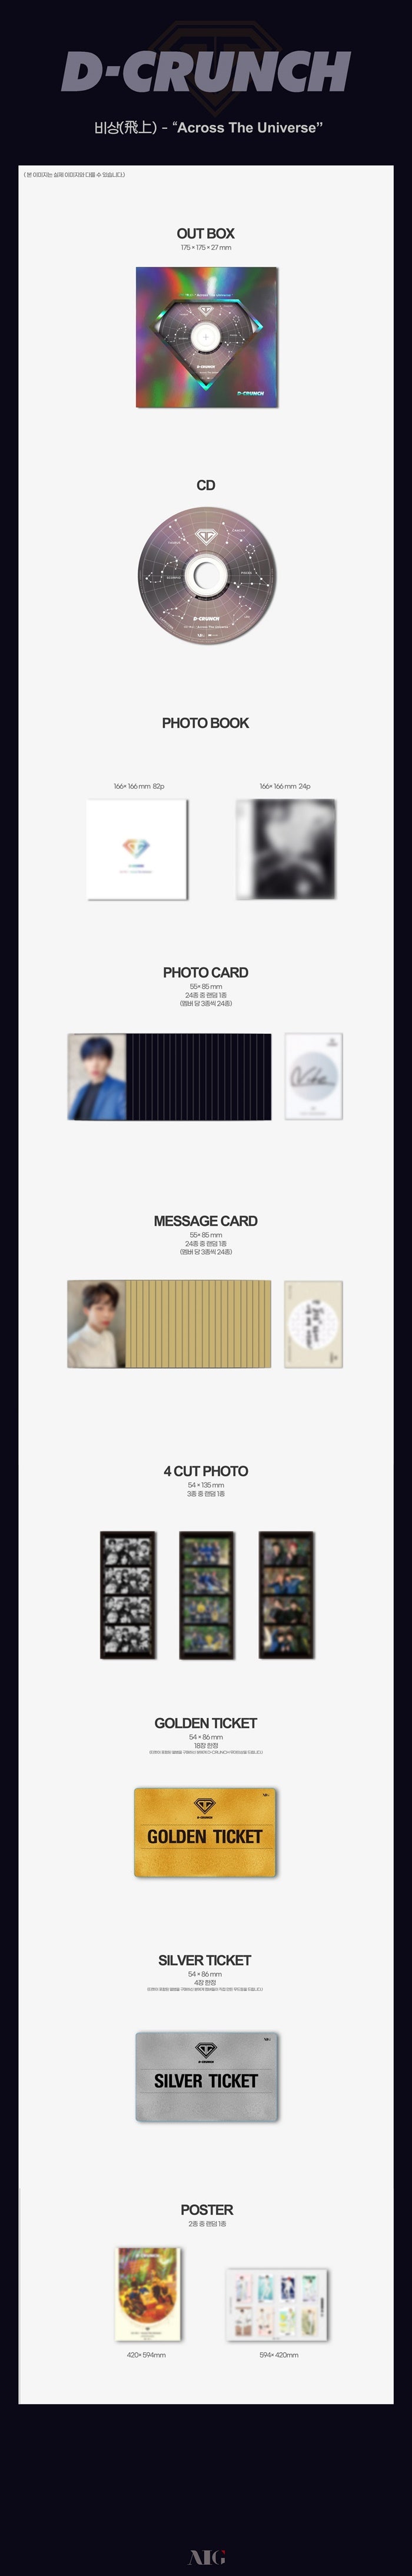 1 CD
1 Photo Book (82, 24 pages)
1 Photo Card
1 Message Card
1 4-cut Photos